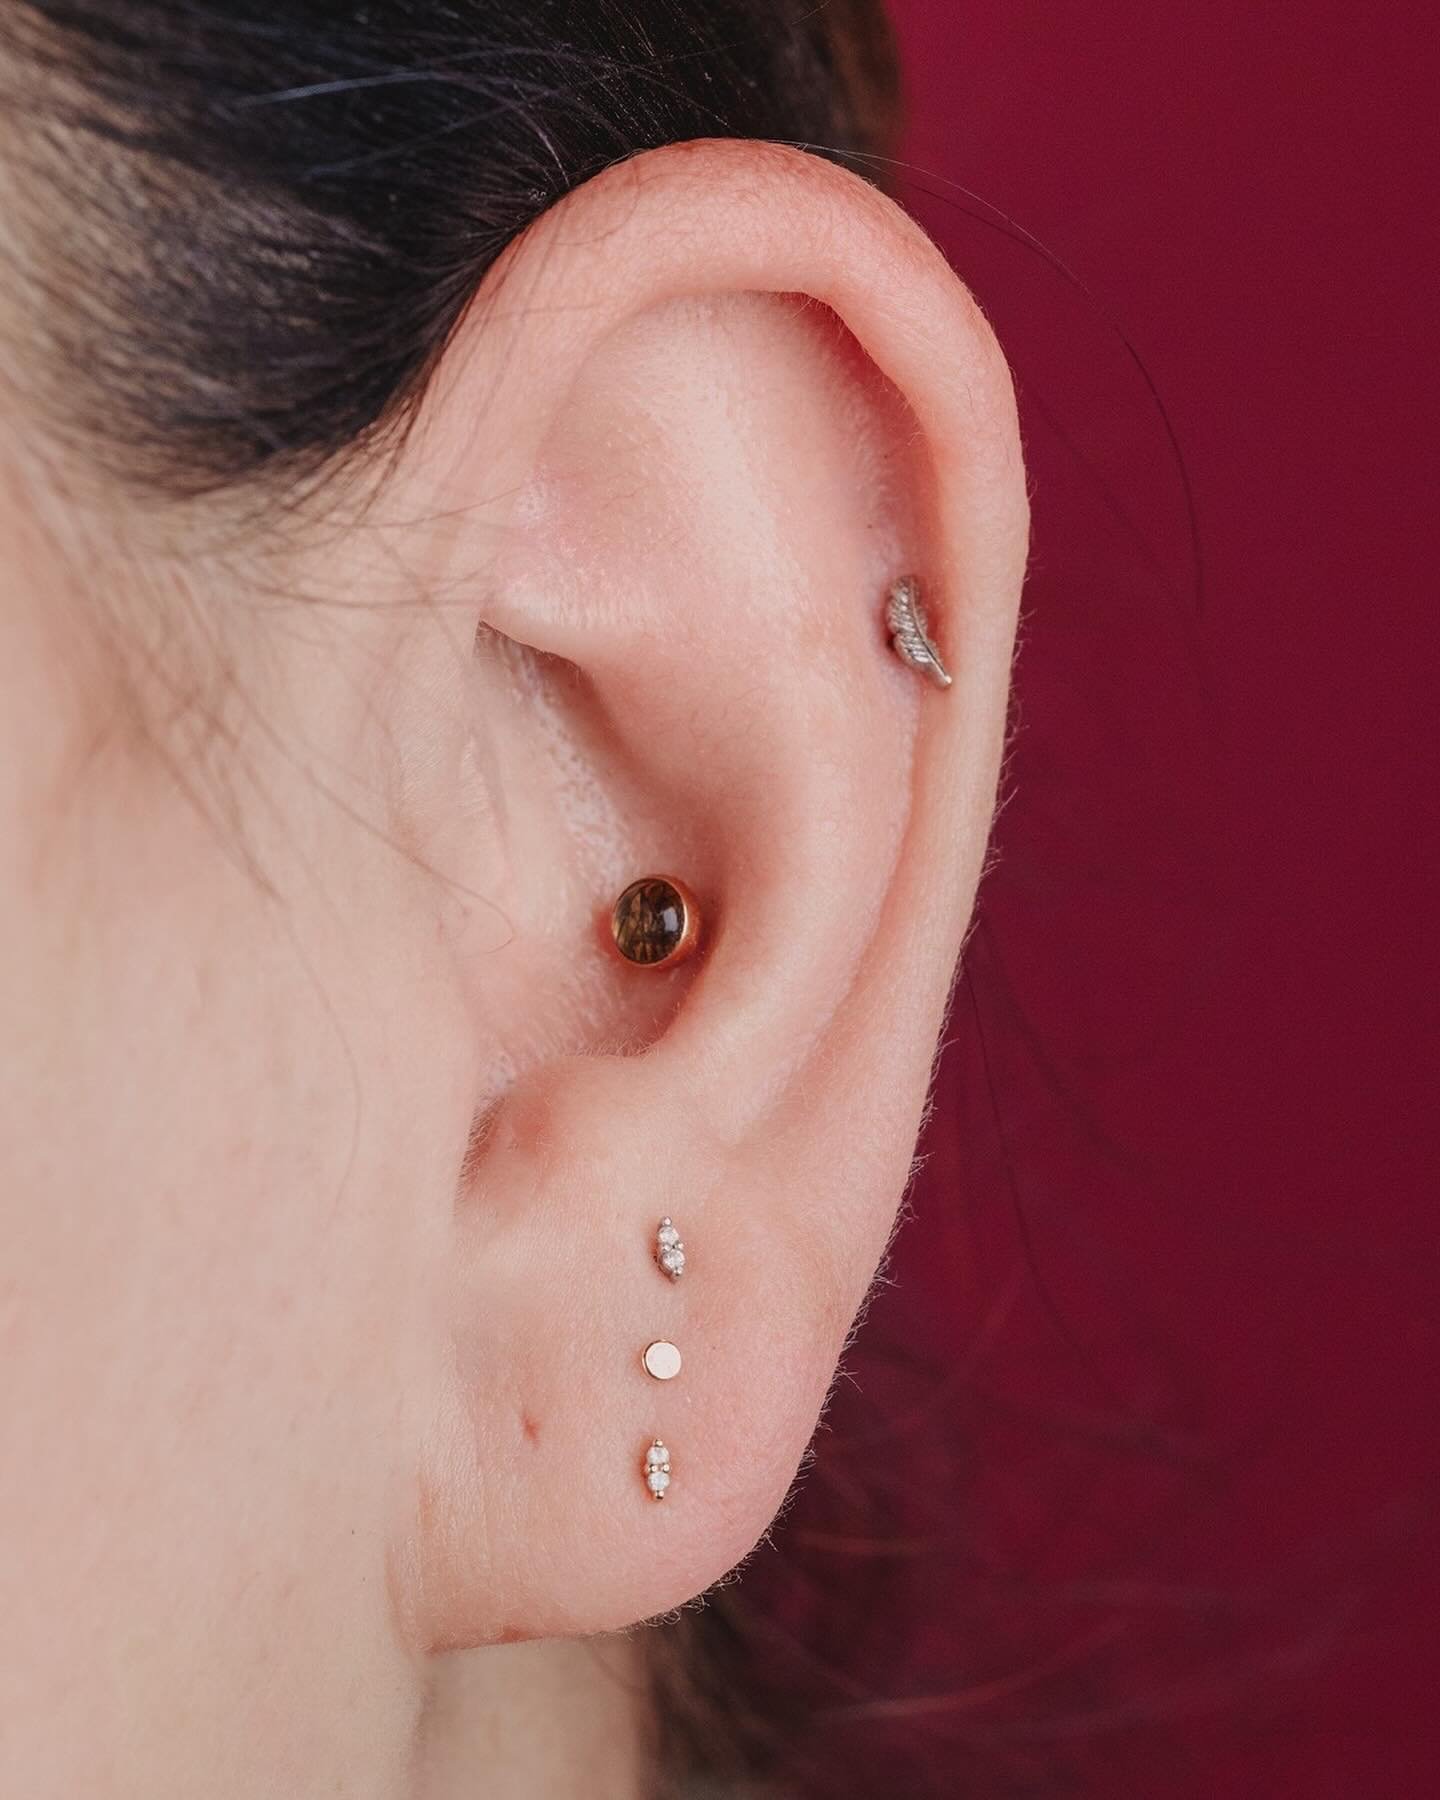 FROM HERE🌘
 
YOU GO
 
We got to add to Nicole&rsquo;s ear with some cute ends from Buddha Jewelry in this stacked lobe setup as a fun way to add to her other pieces💫
⠀⠀⠀⠀⠀⠀⠀
⠀⠀⠀⠀⠀⠀⠀⠀⠀
~  @buddhajewelryofficial ~
⠀⠀⠀⠀⠀⠀⠀⠀⠀
⠀⠀⠀⠀⠀⠀⠀⠀⠀
⠀⠀⠀⠀⠀⠀⠀⠀⠀
📸@mrb